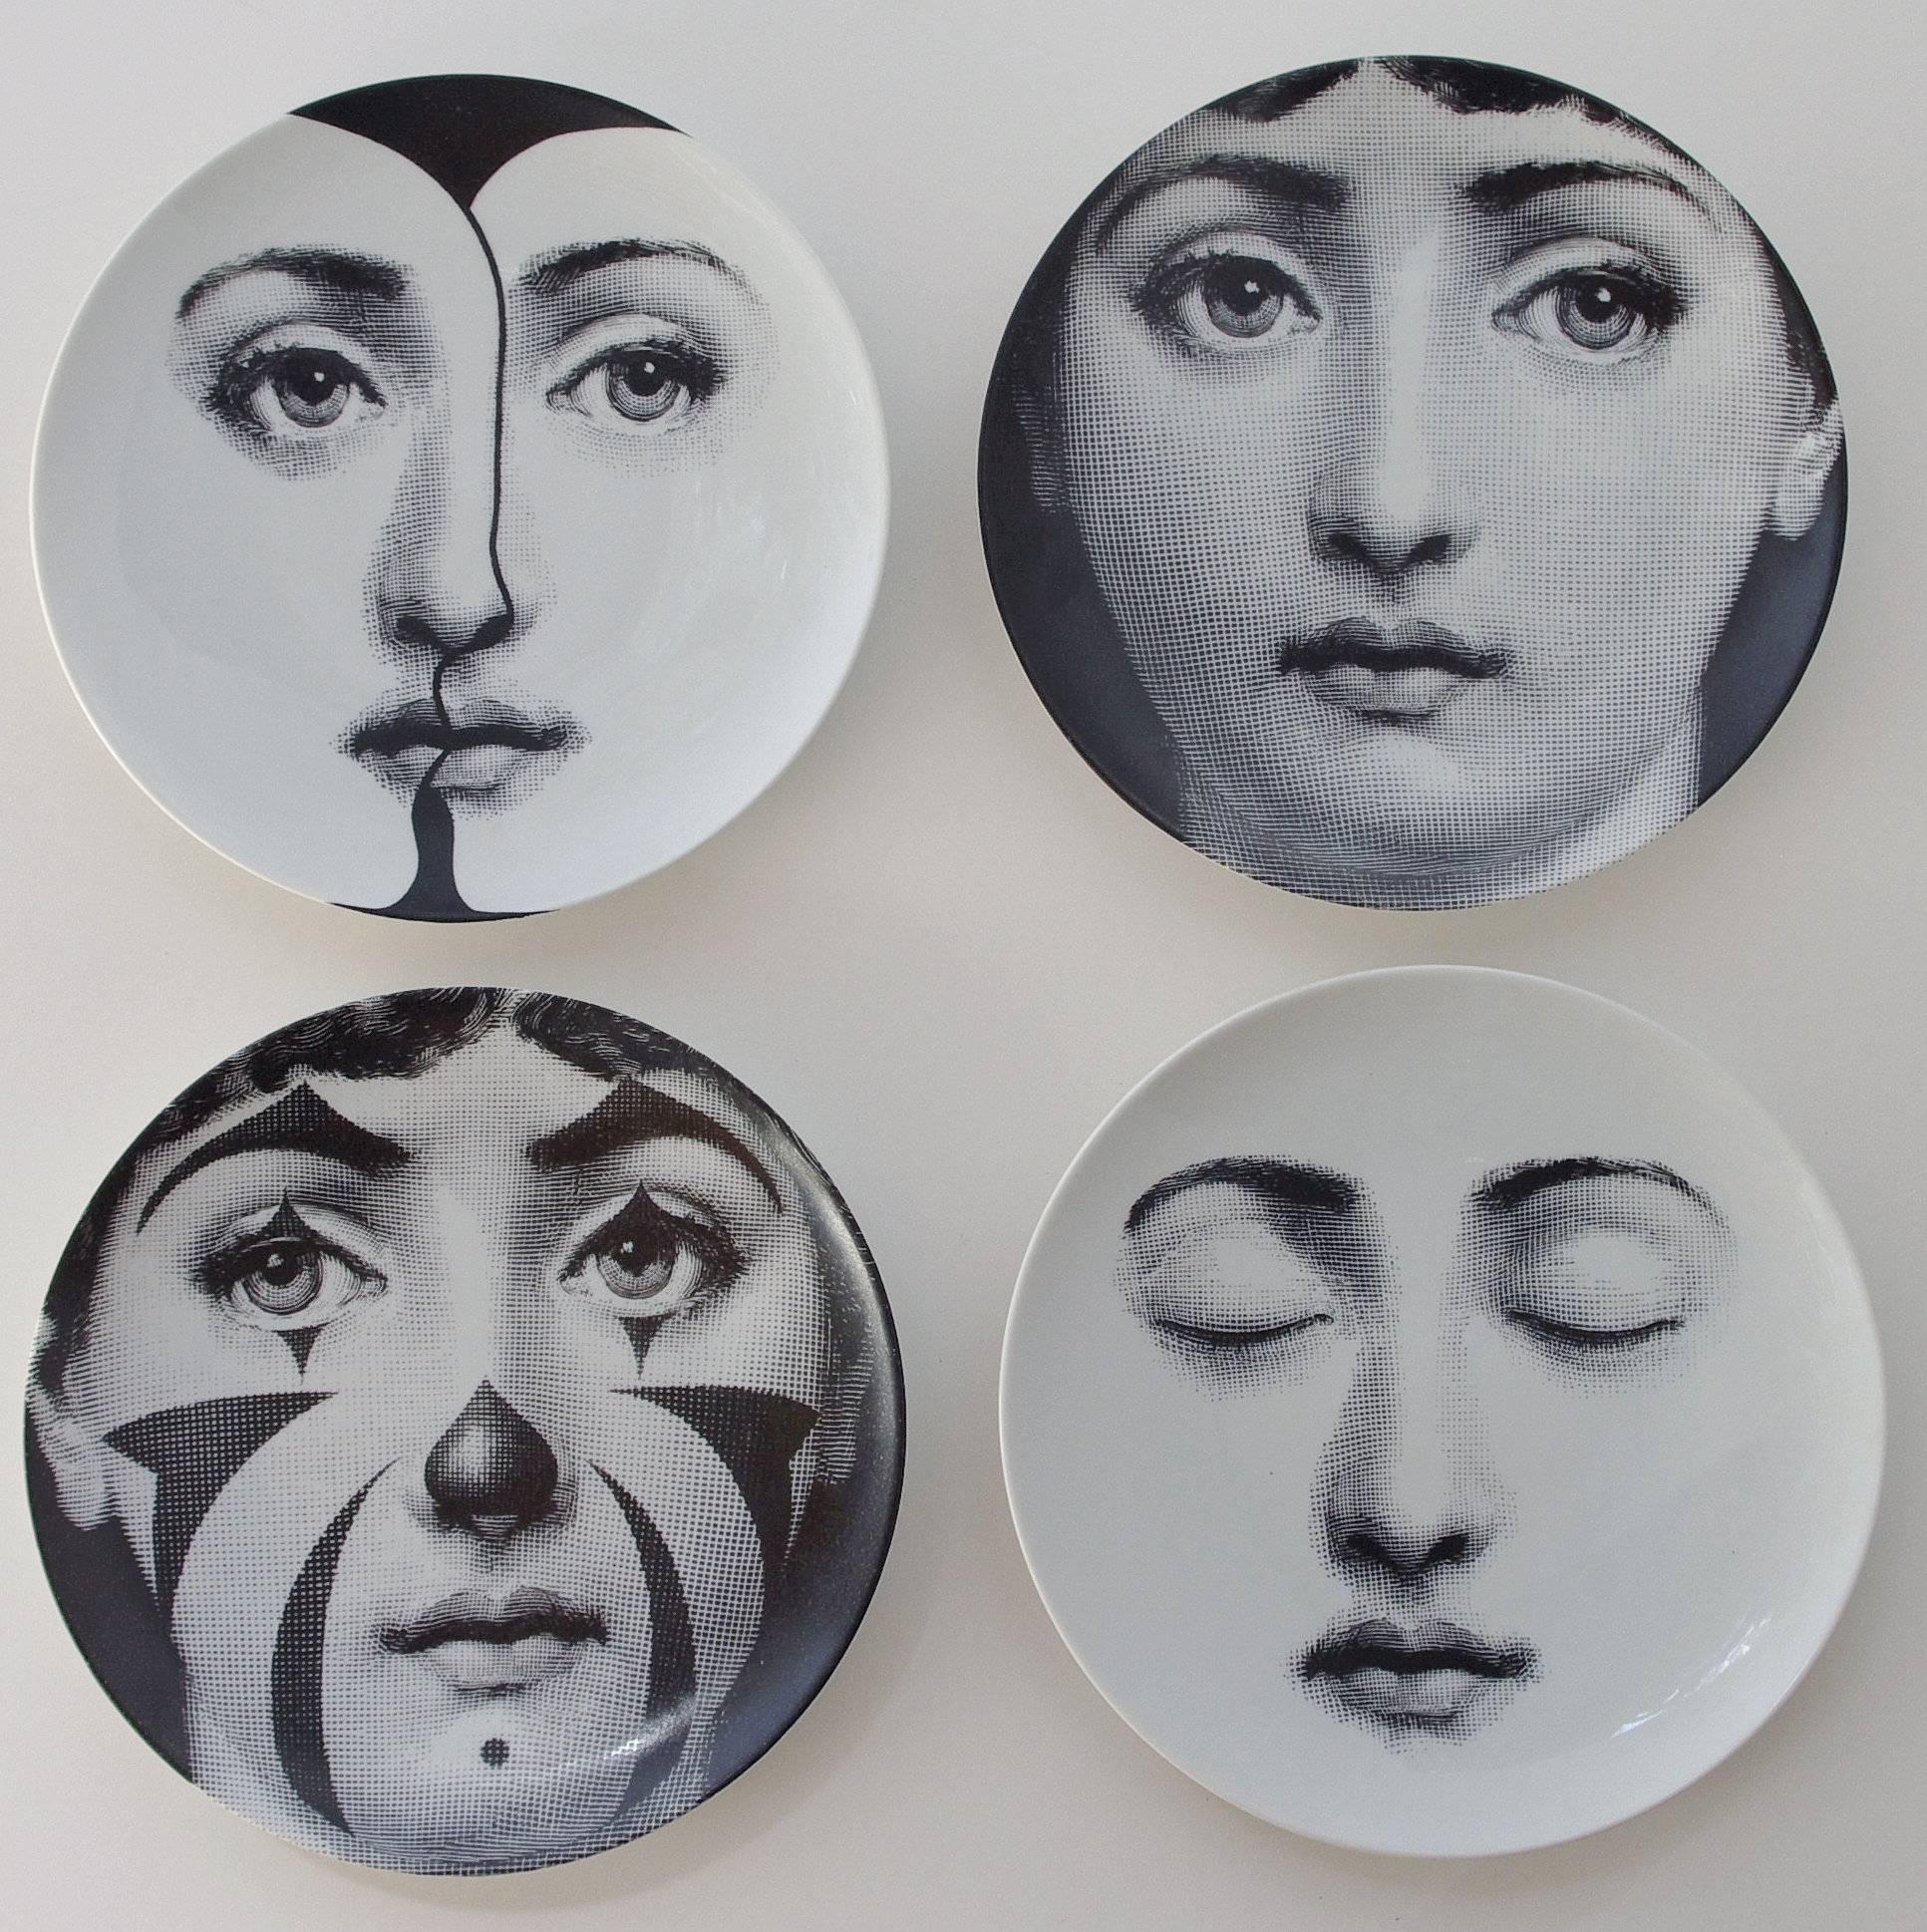 A set of four vintage Piero Fornasetti "Tema e Variazioni" plates by Ancap Porcellana Italy.
Each plate is in perfect condition and marked on the back.
Fornasetti, Milano
Made in Italy
Ancap Porcellana
Sona Verona Italy
Tema e